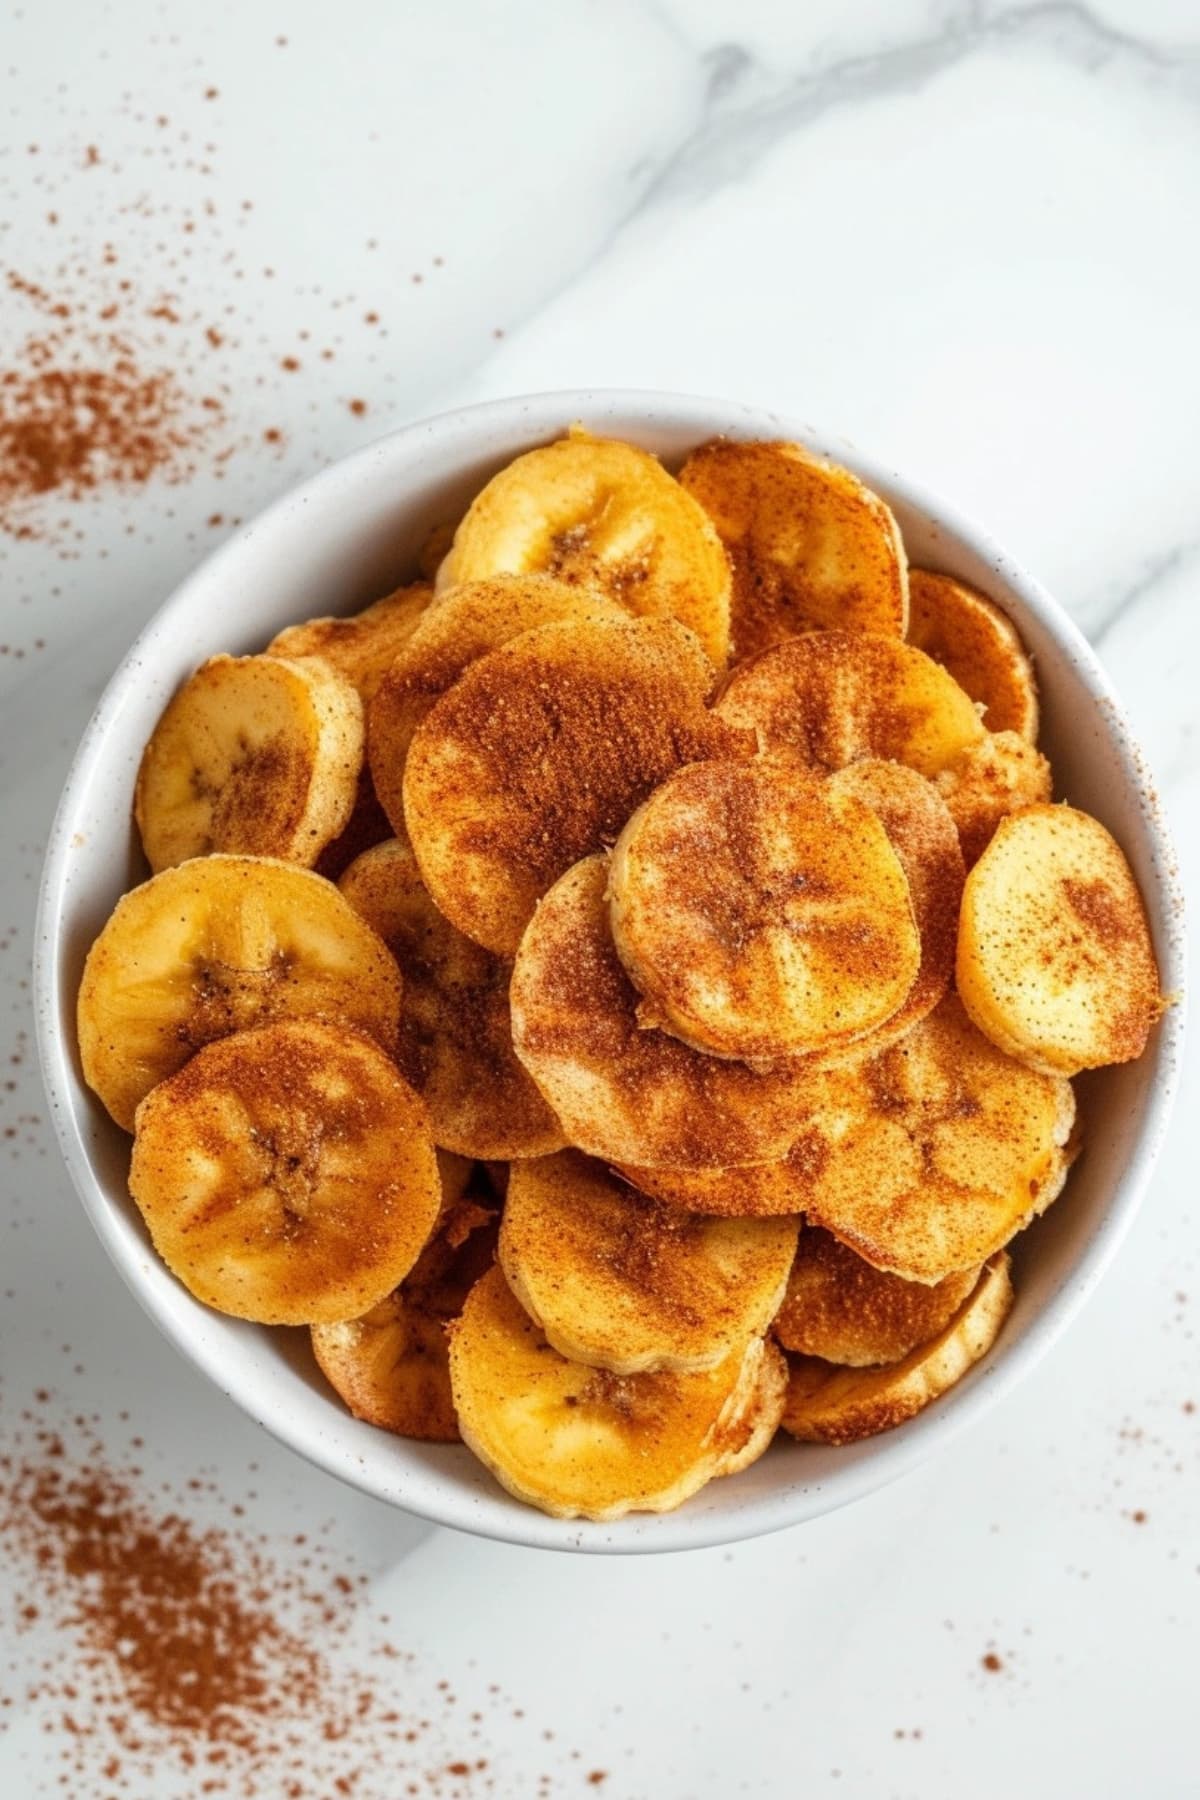 Banana chips in a white bowl sprinkled with cinnamon powder.